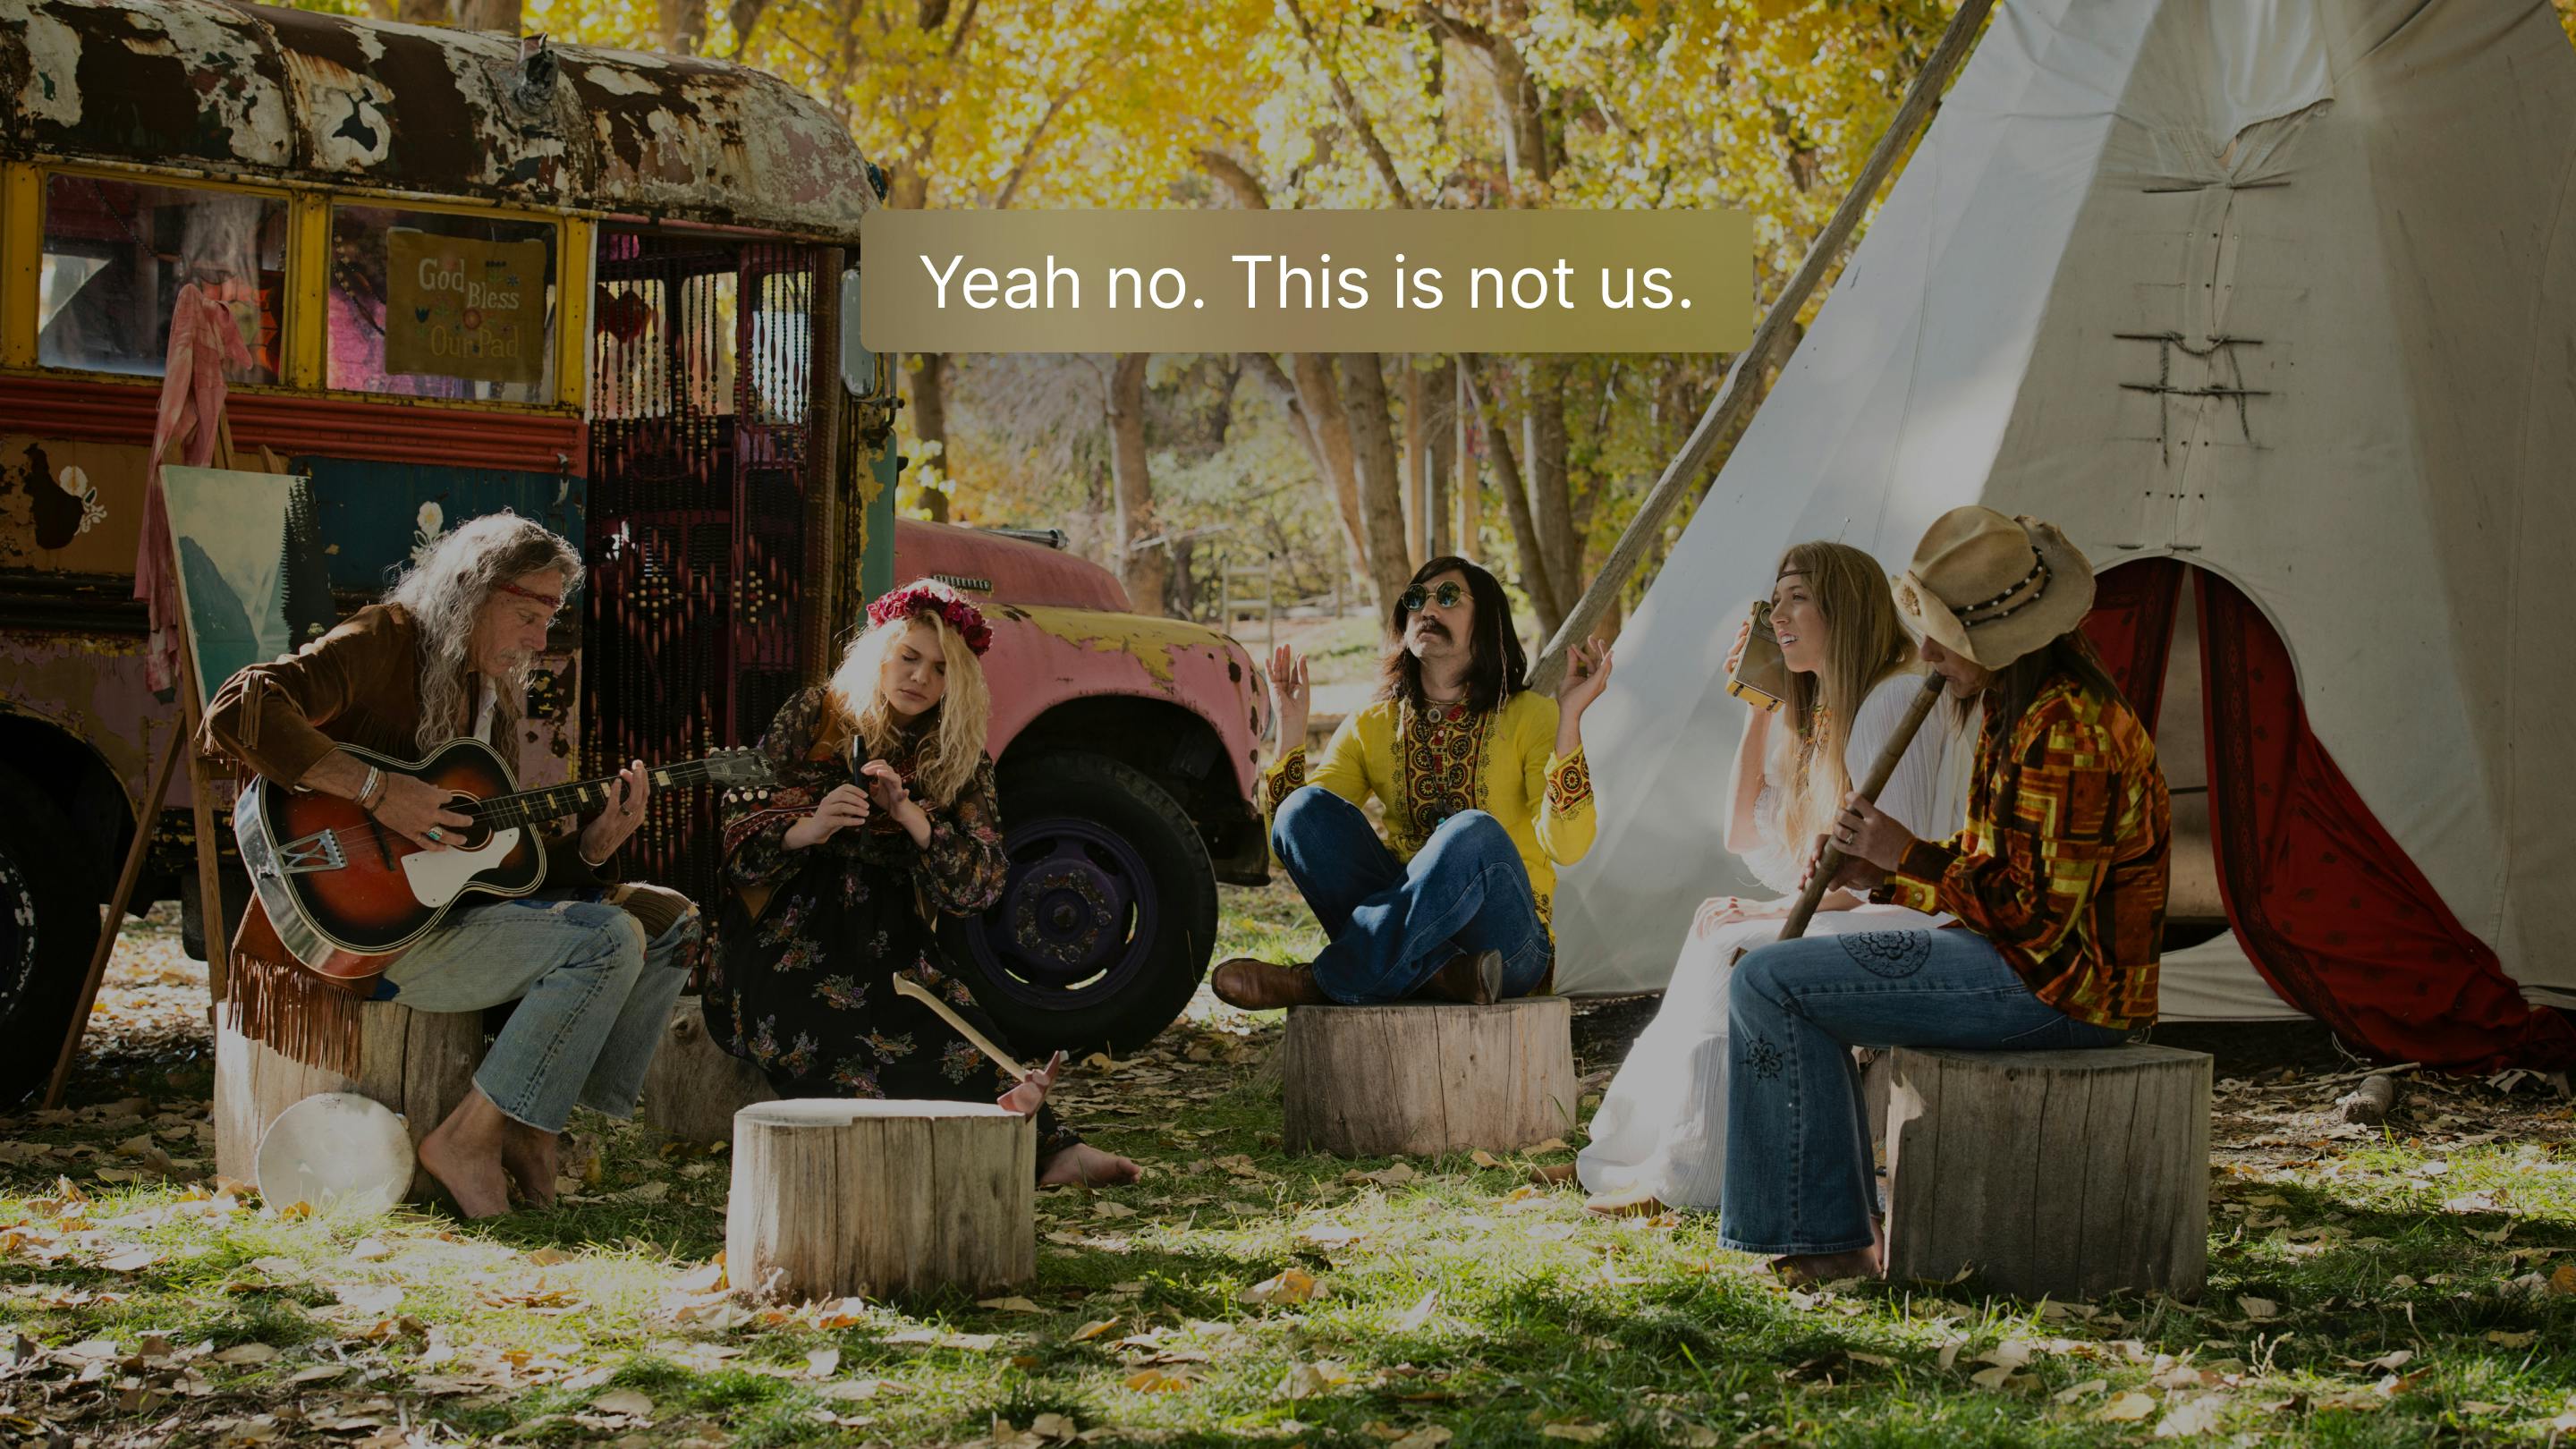 Image of a group of hippies with a note overlaid saying 'Yeah no, this is not us'